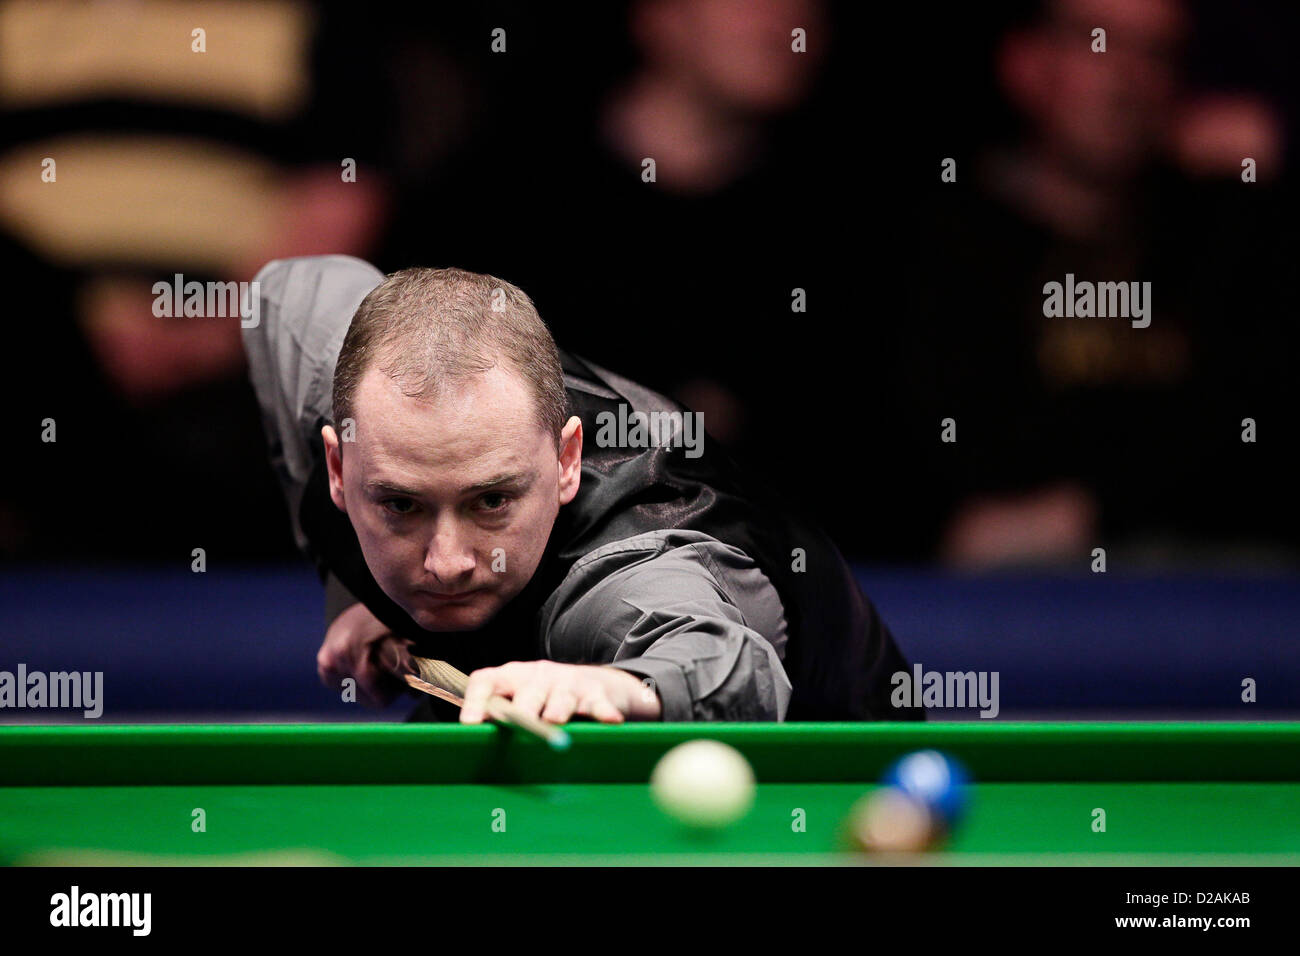 London, UK. 18th January 2013. Graeme Dott in action against Judd Trump during the Masters Snooker Quarter Finals from Alexandra Palace. Stock Photo